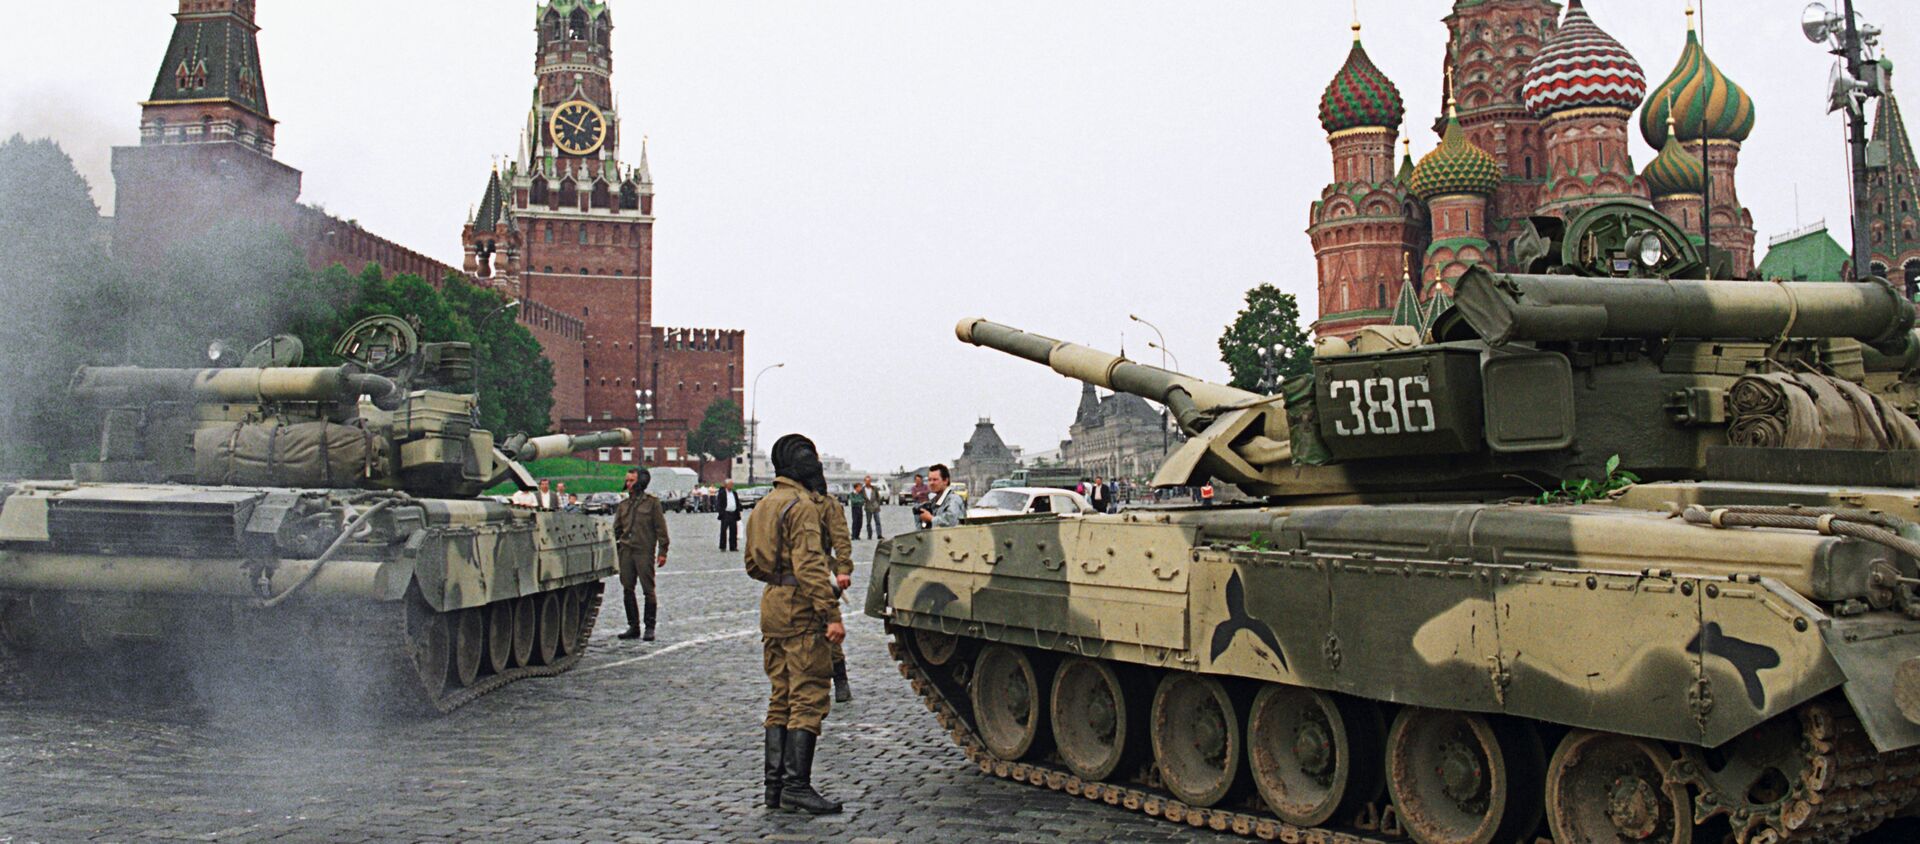 Tanks in the Red Square during the coup attempt on August 19, 1991 - Sputnik International, 1920, 19.08.2021